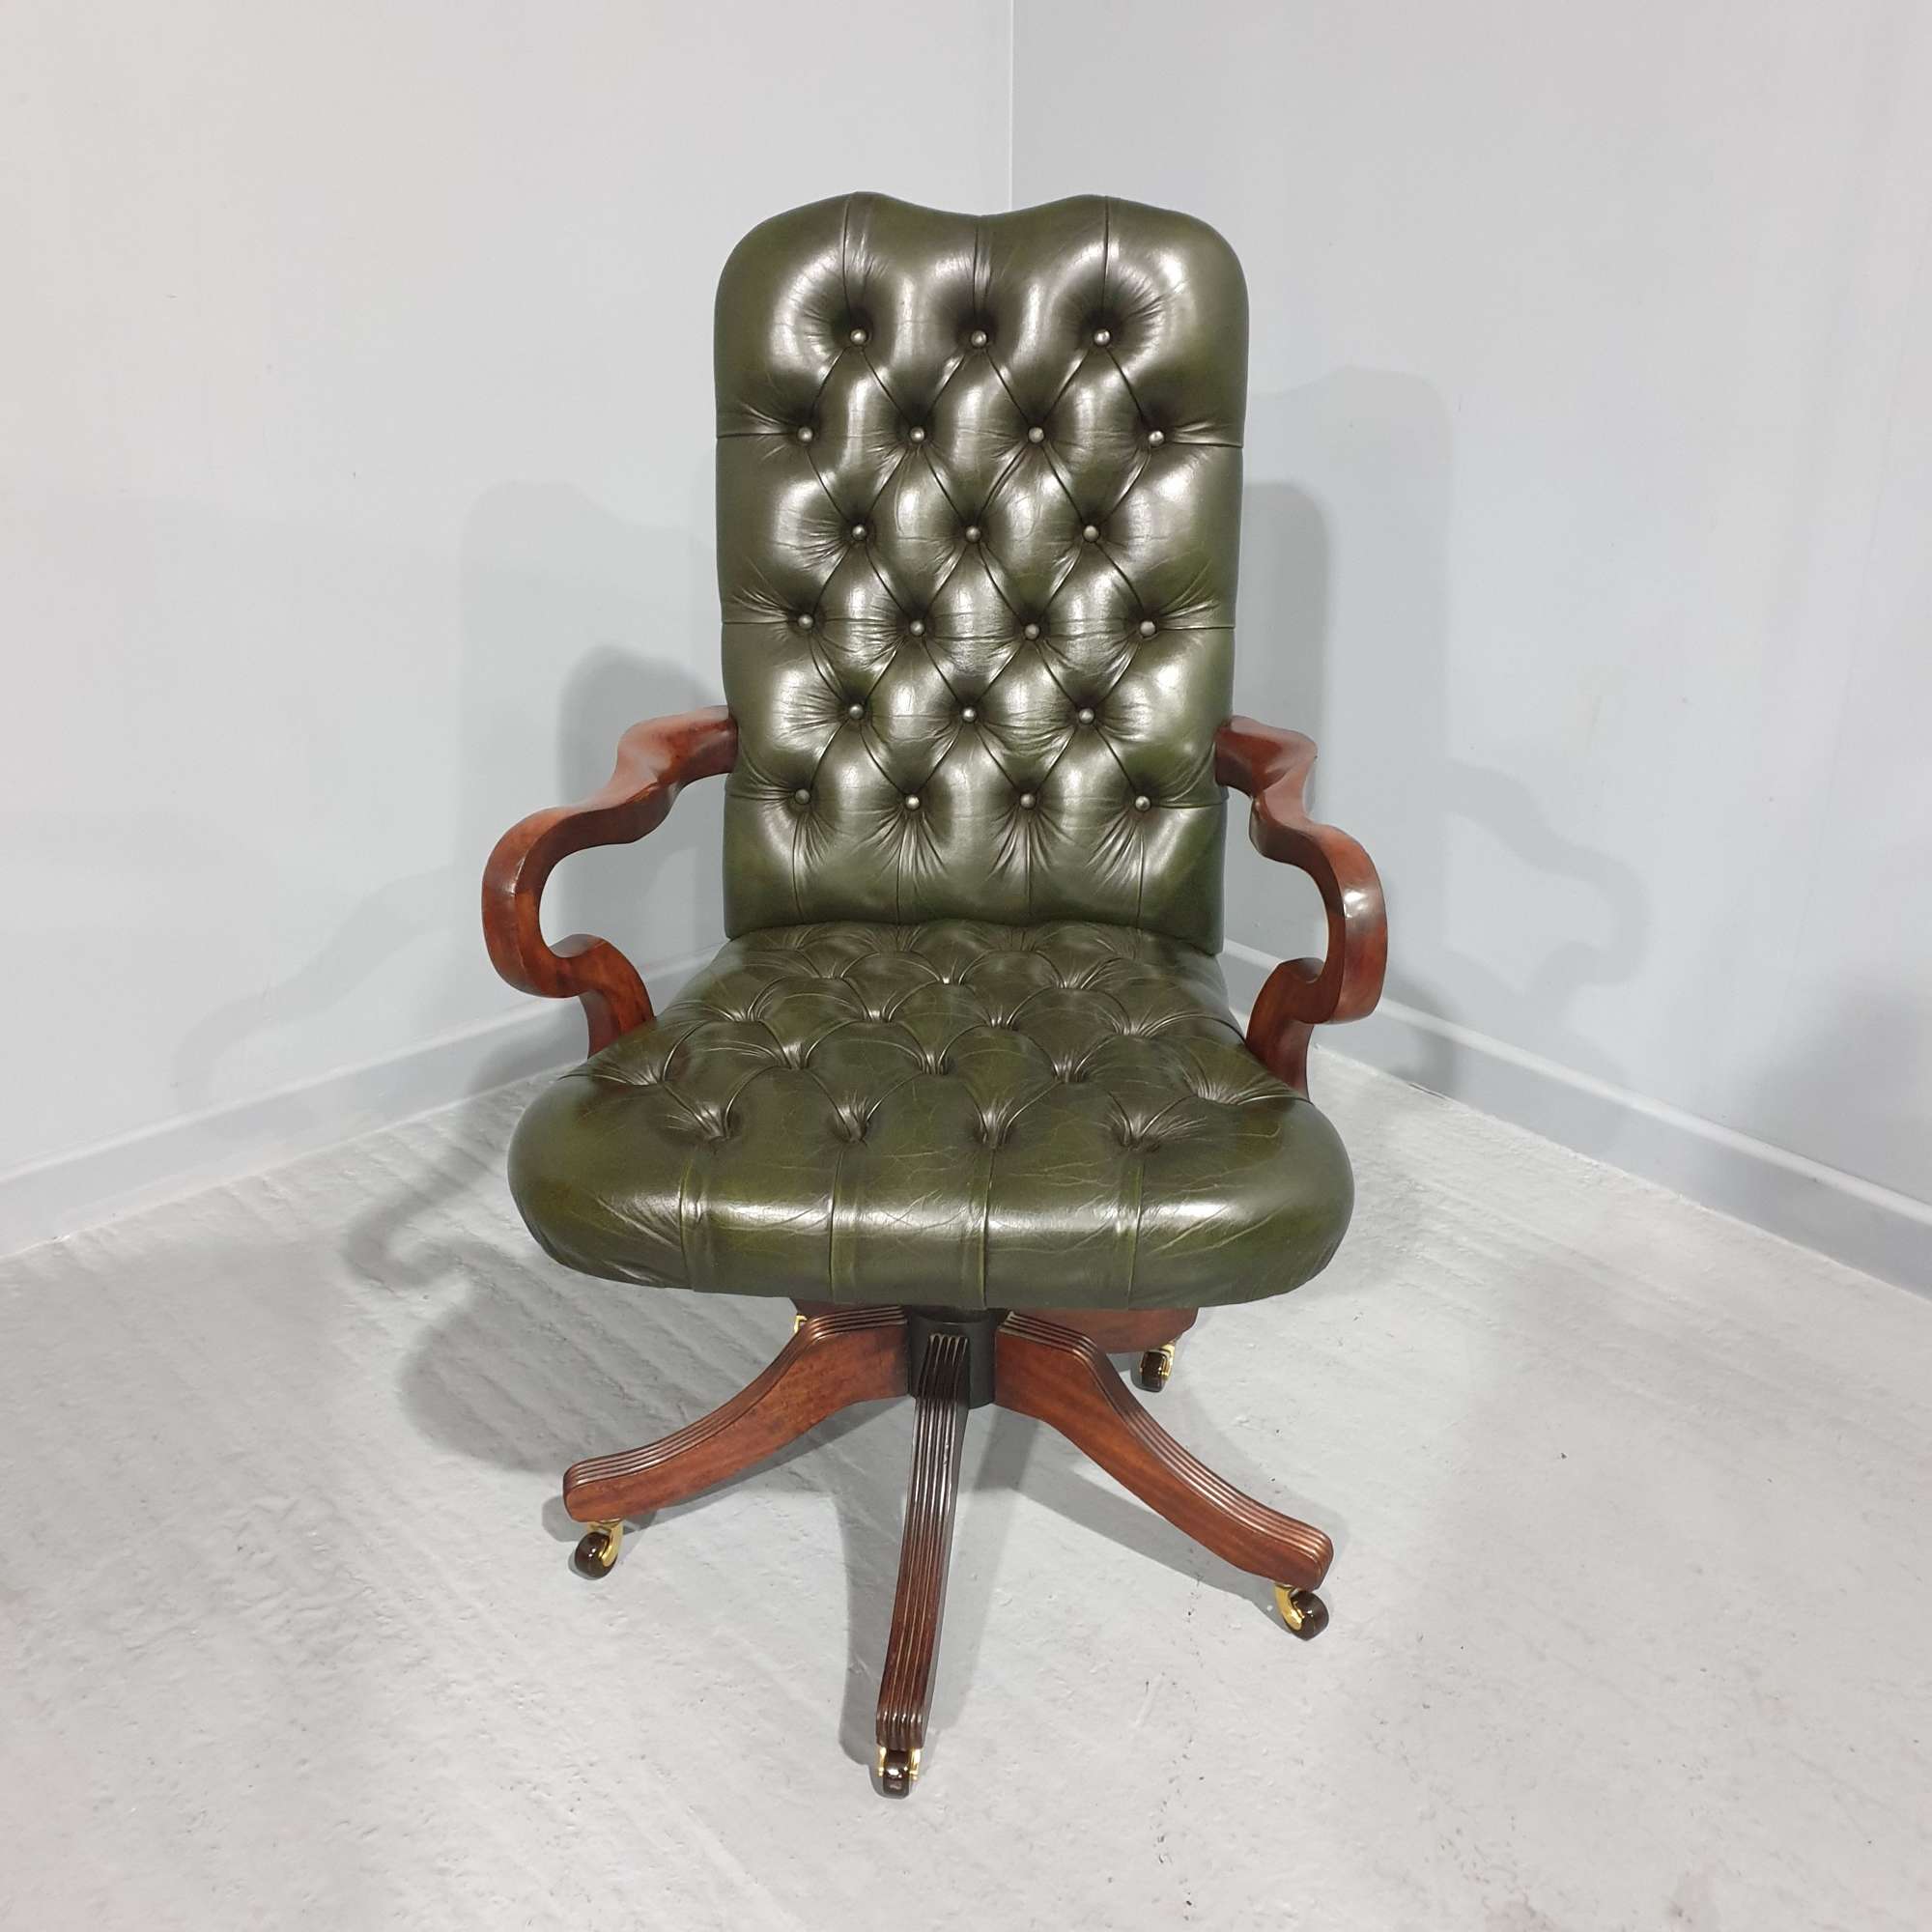 Super Green Leather Desk Chair